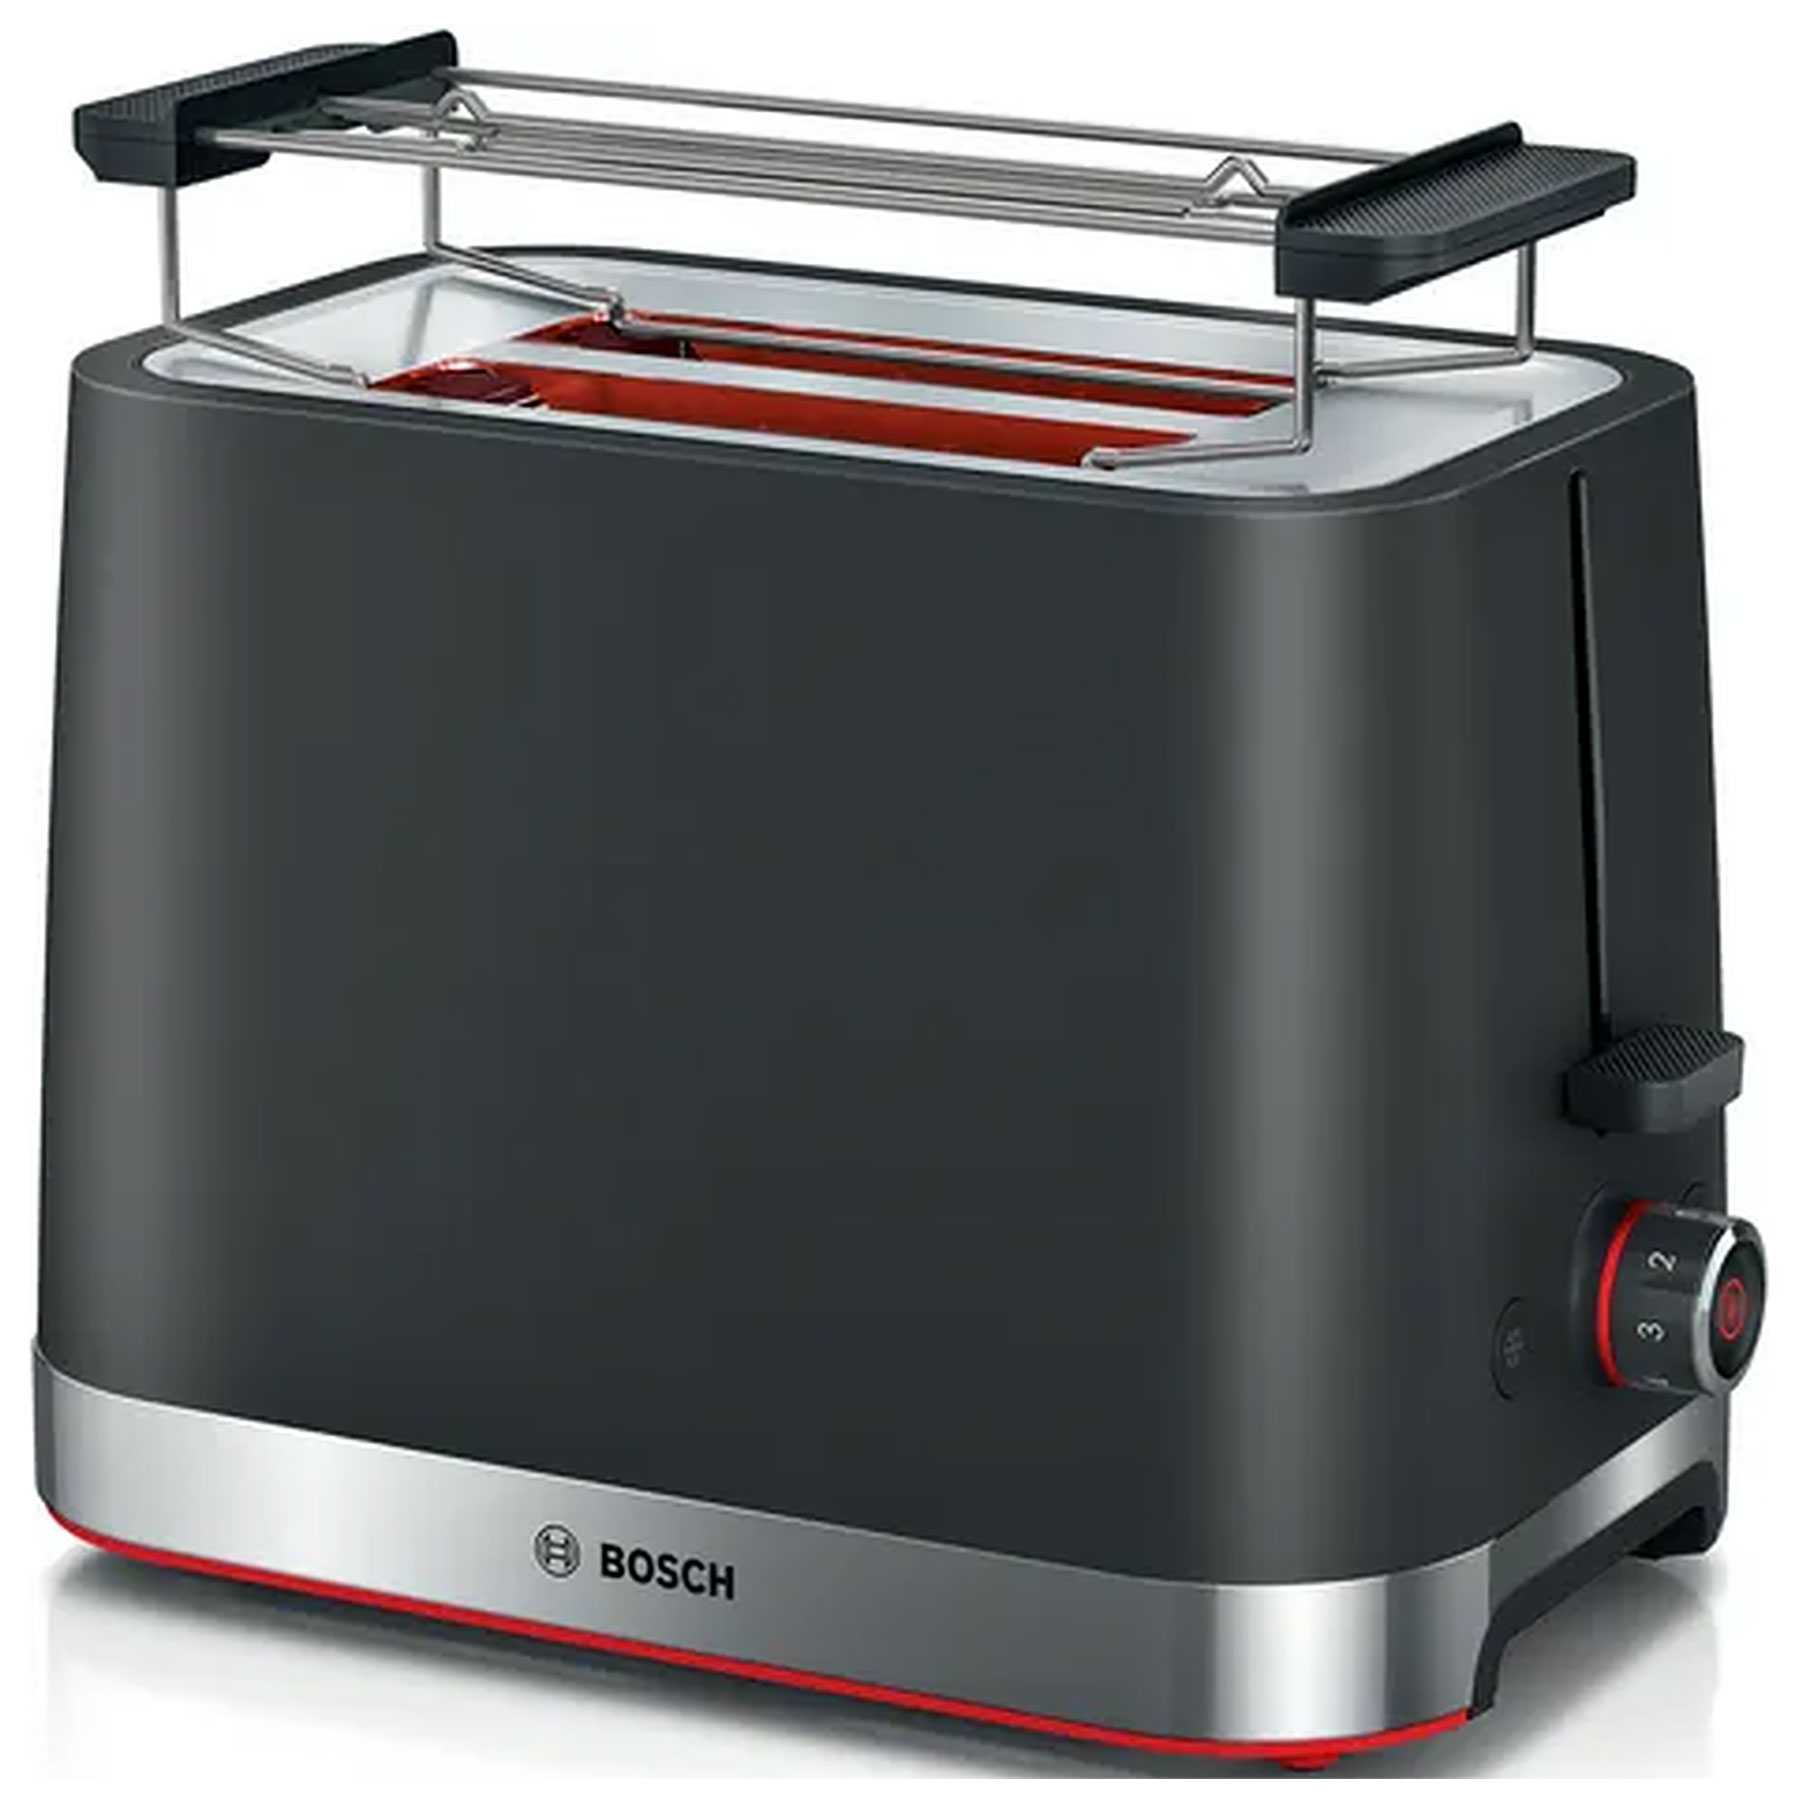 Image of Bosch TAT4M223GB 2 Slice Toaster in Black Extra Wide Slots